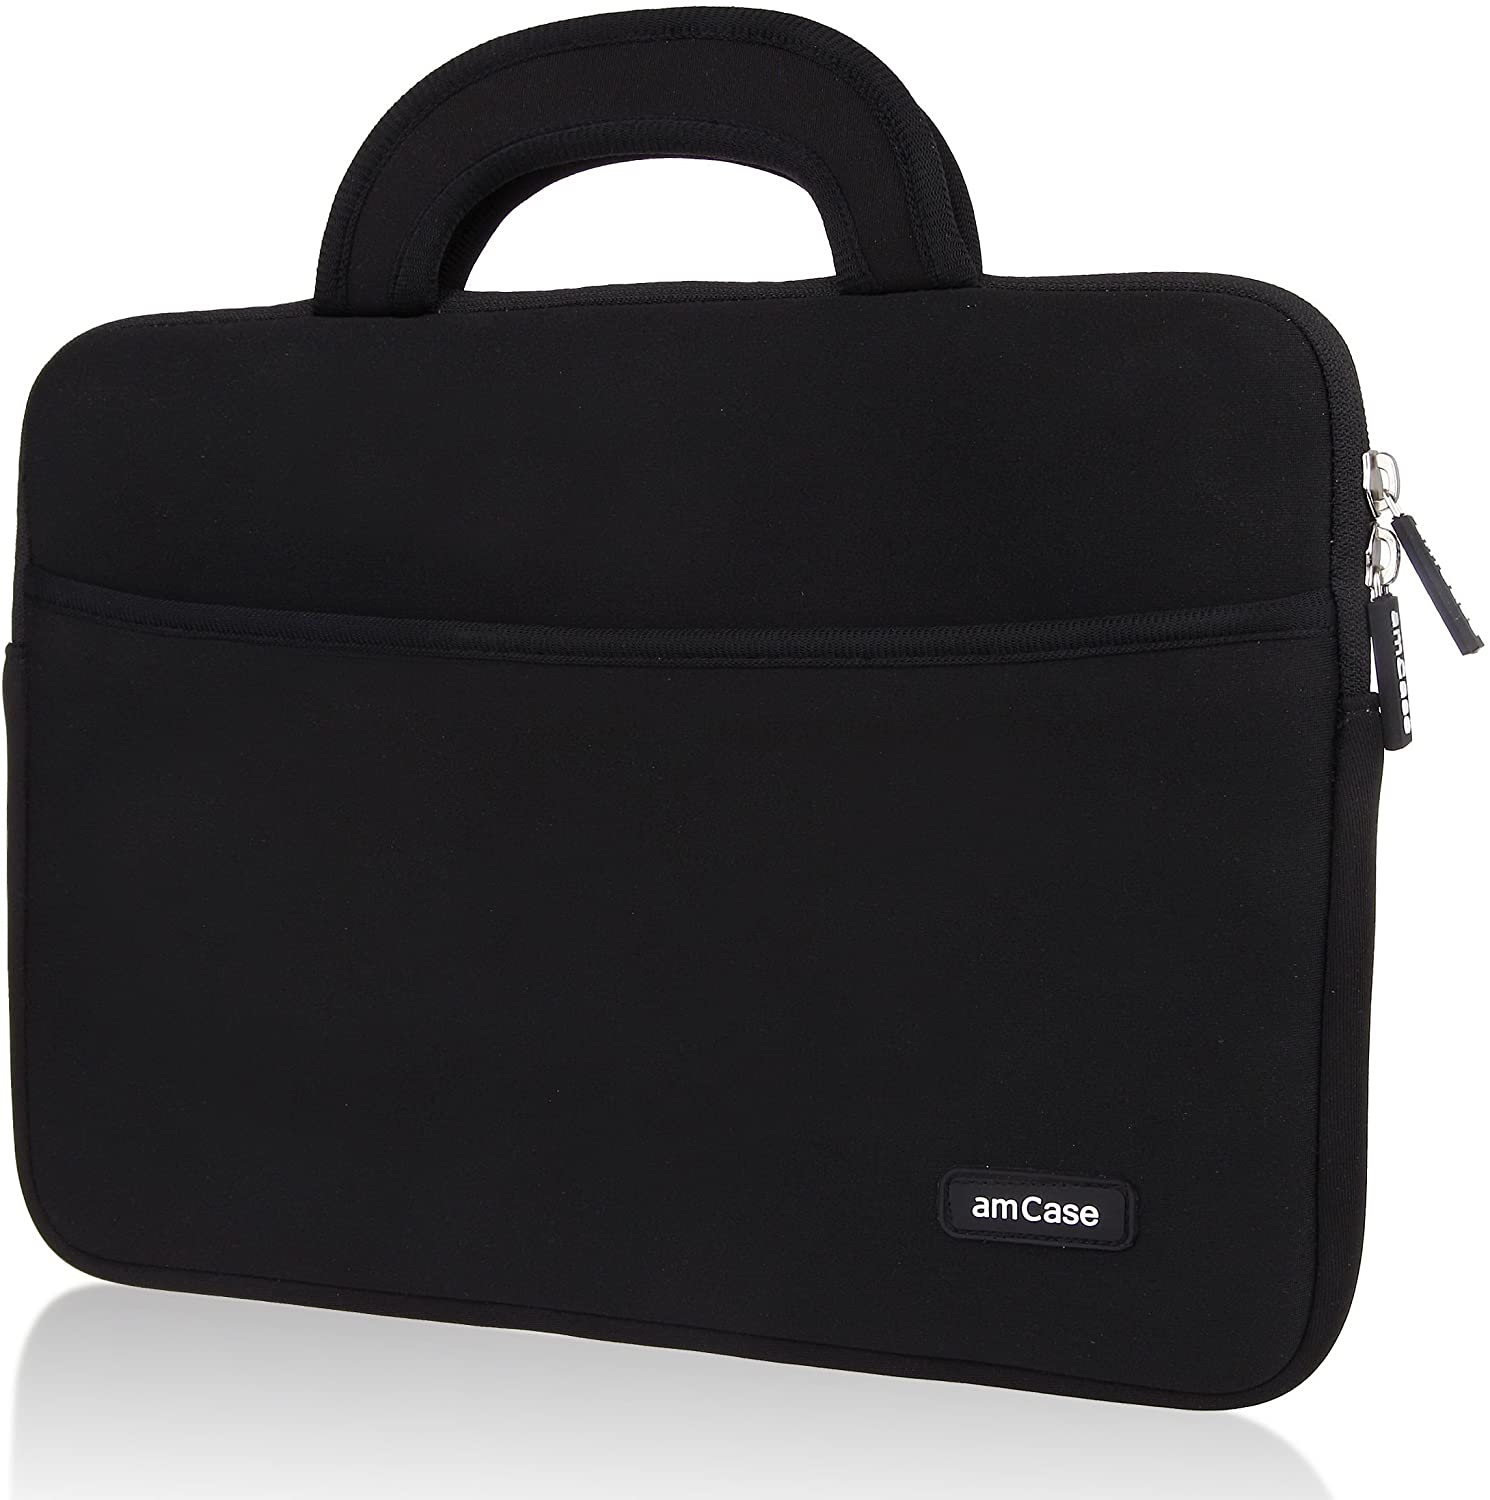 Protective Chromebook Case for Students  Higher Ground Gear